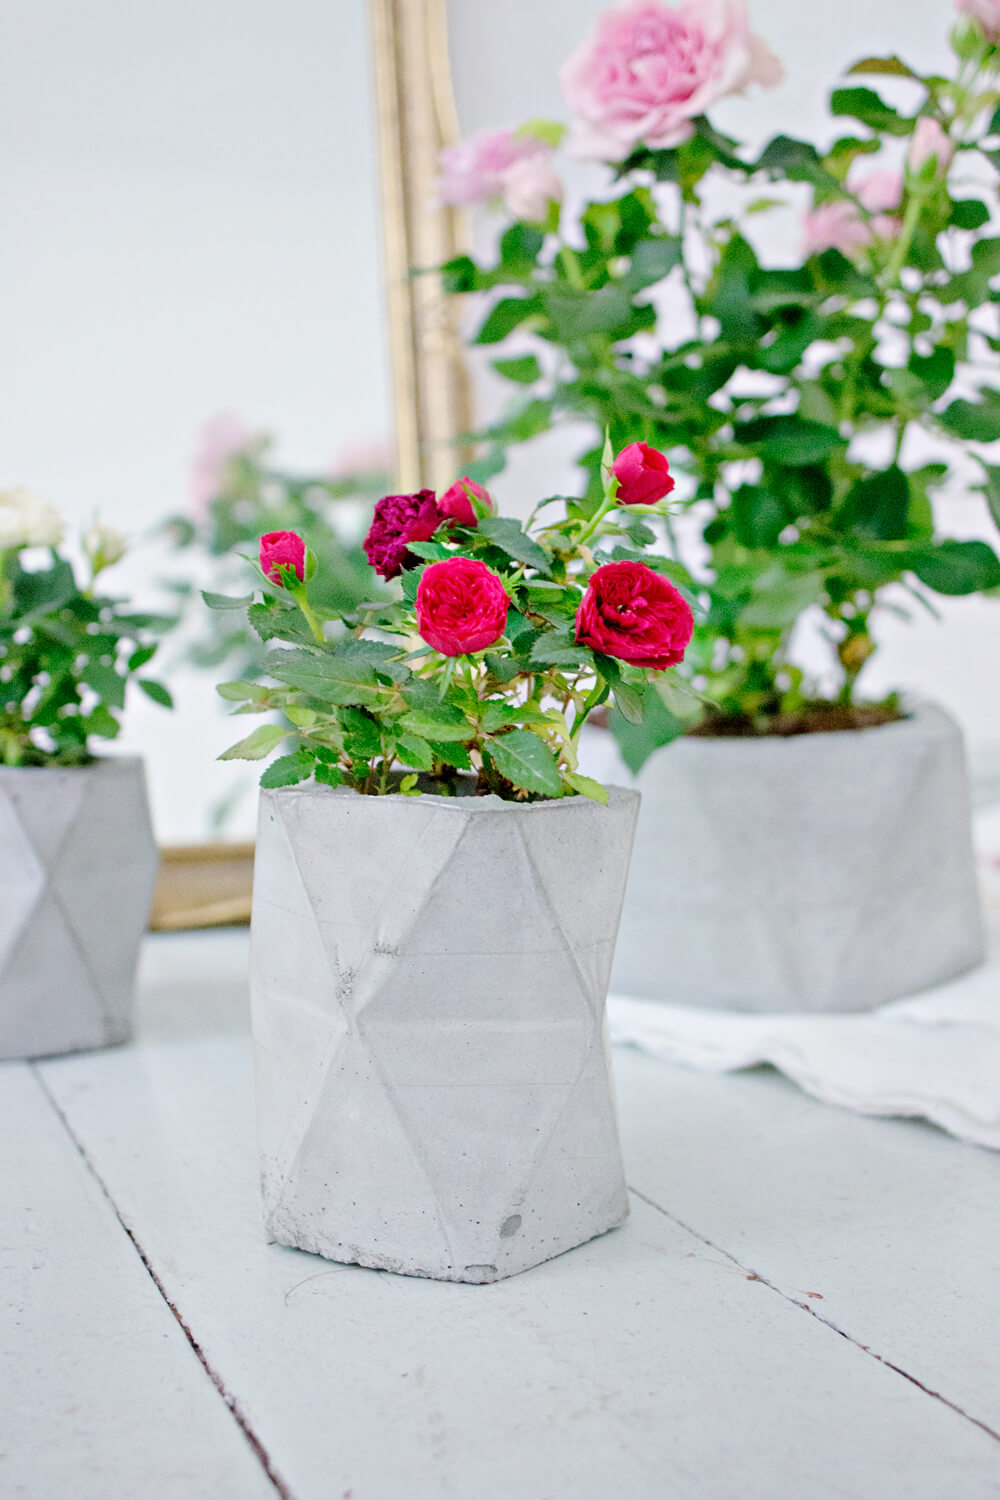 15 Awesome DIY Concrete Planter Ideas You Must Try